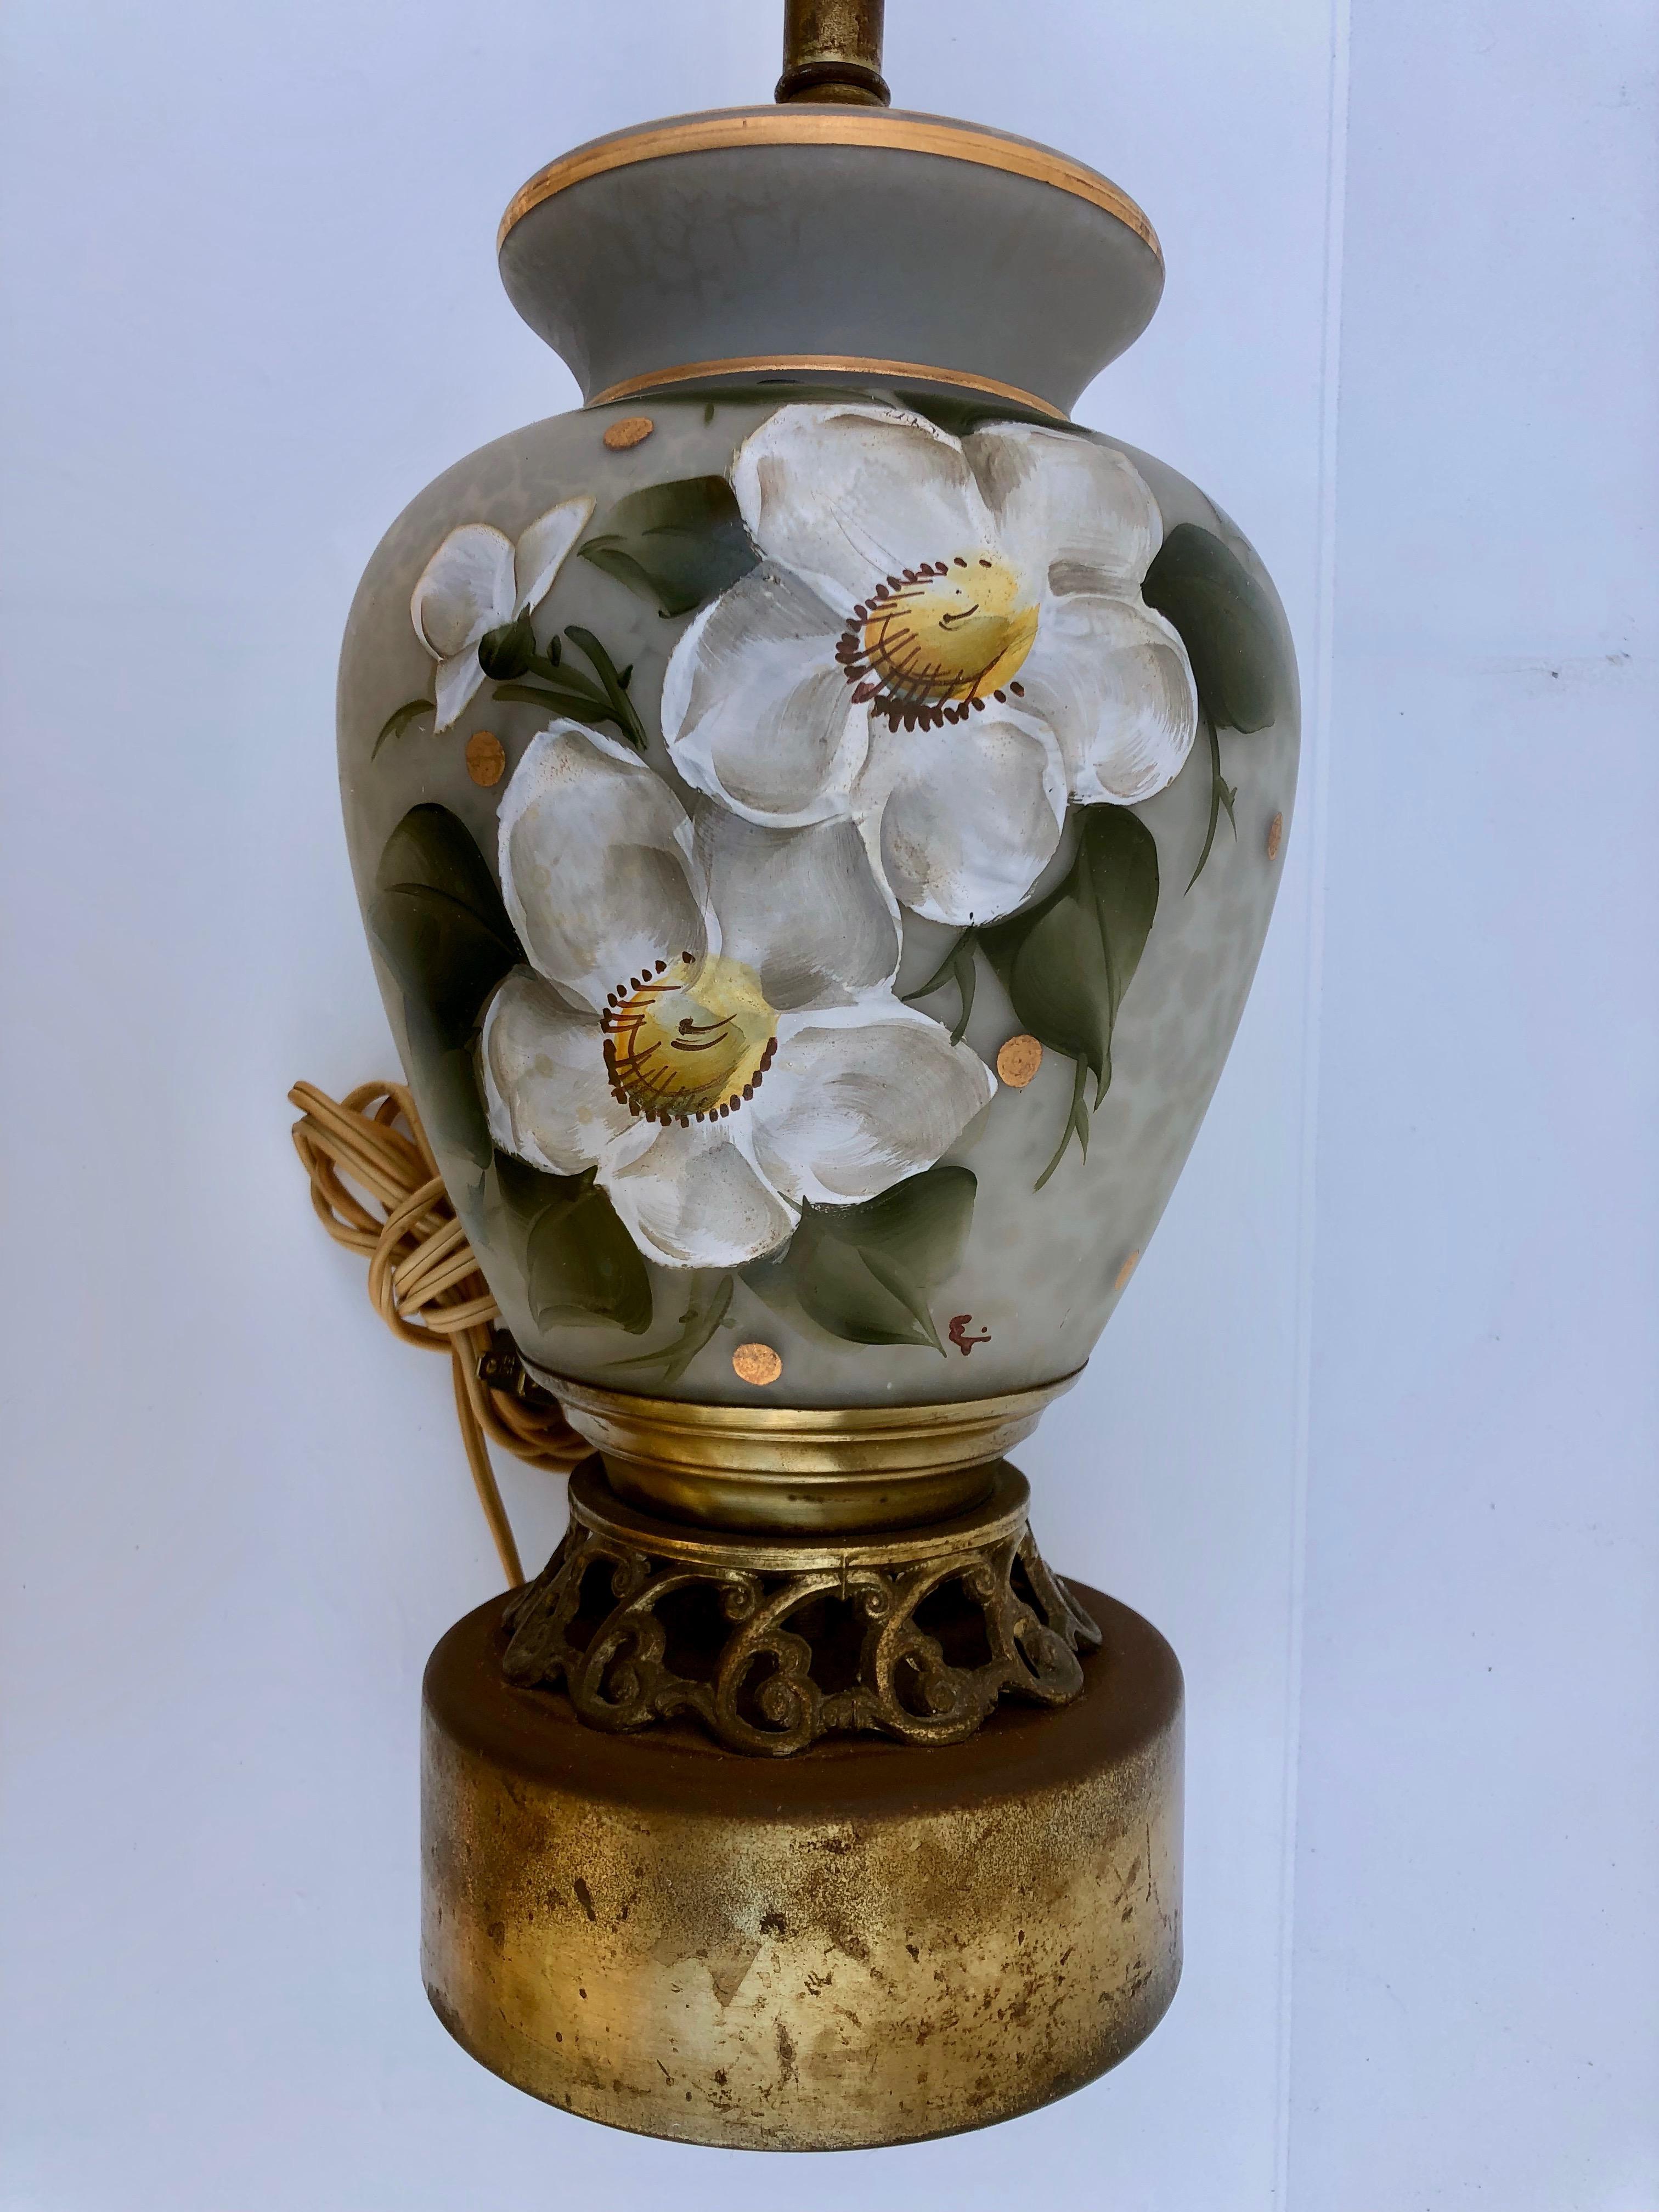 This is a stunning hand blown, hand painted glass lamp. It is a high quality hand painted lamp with an artist signature, as shown. The tone of the lamp is light grey, the two flowers are white with yellow and green leaves while there is gold trim